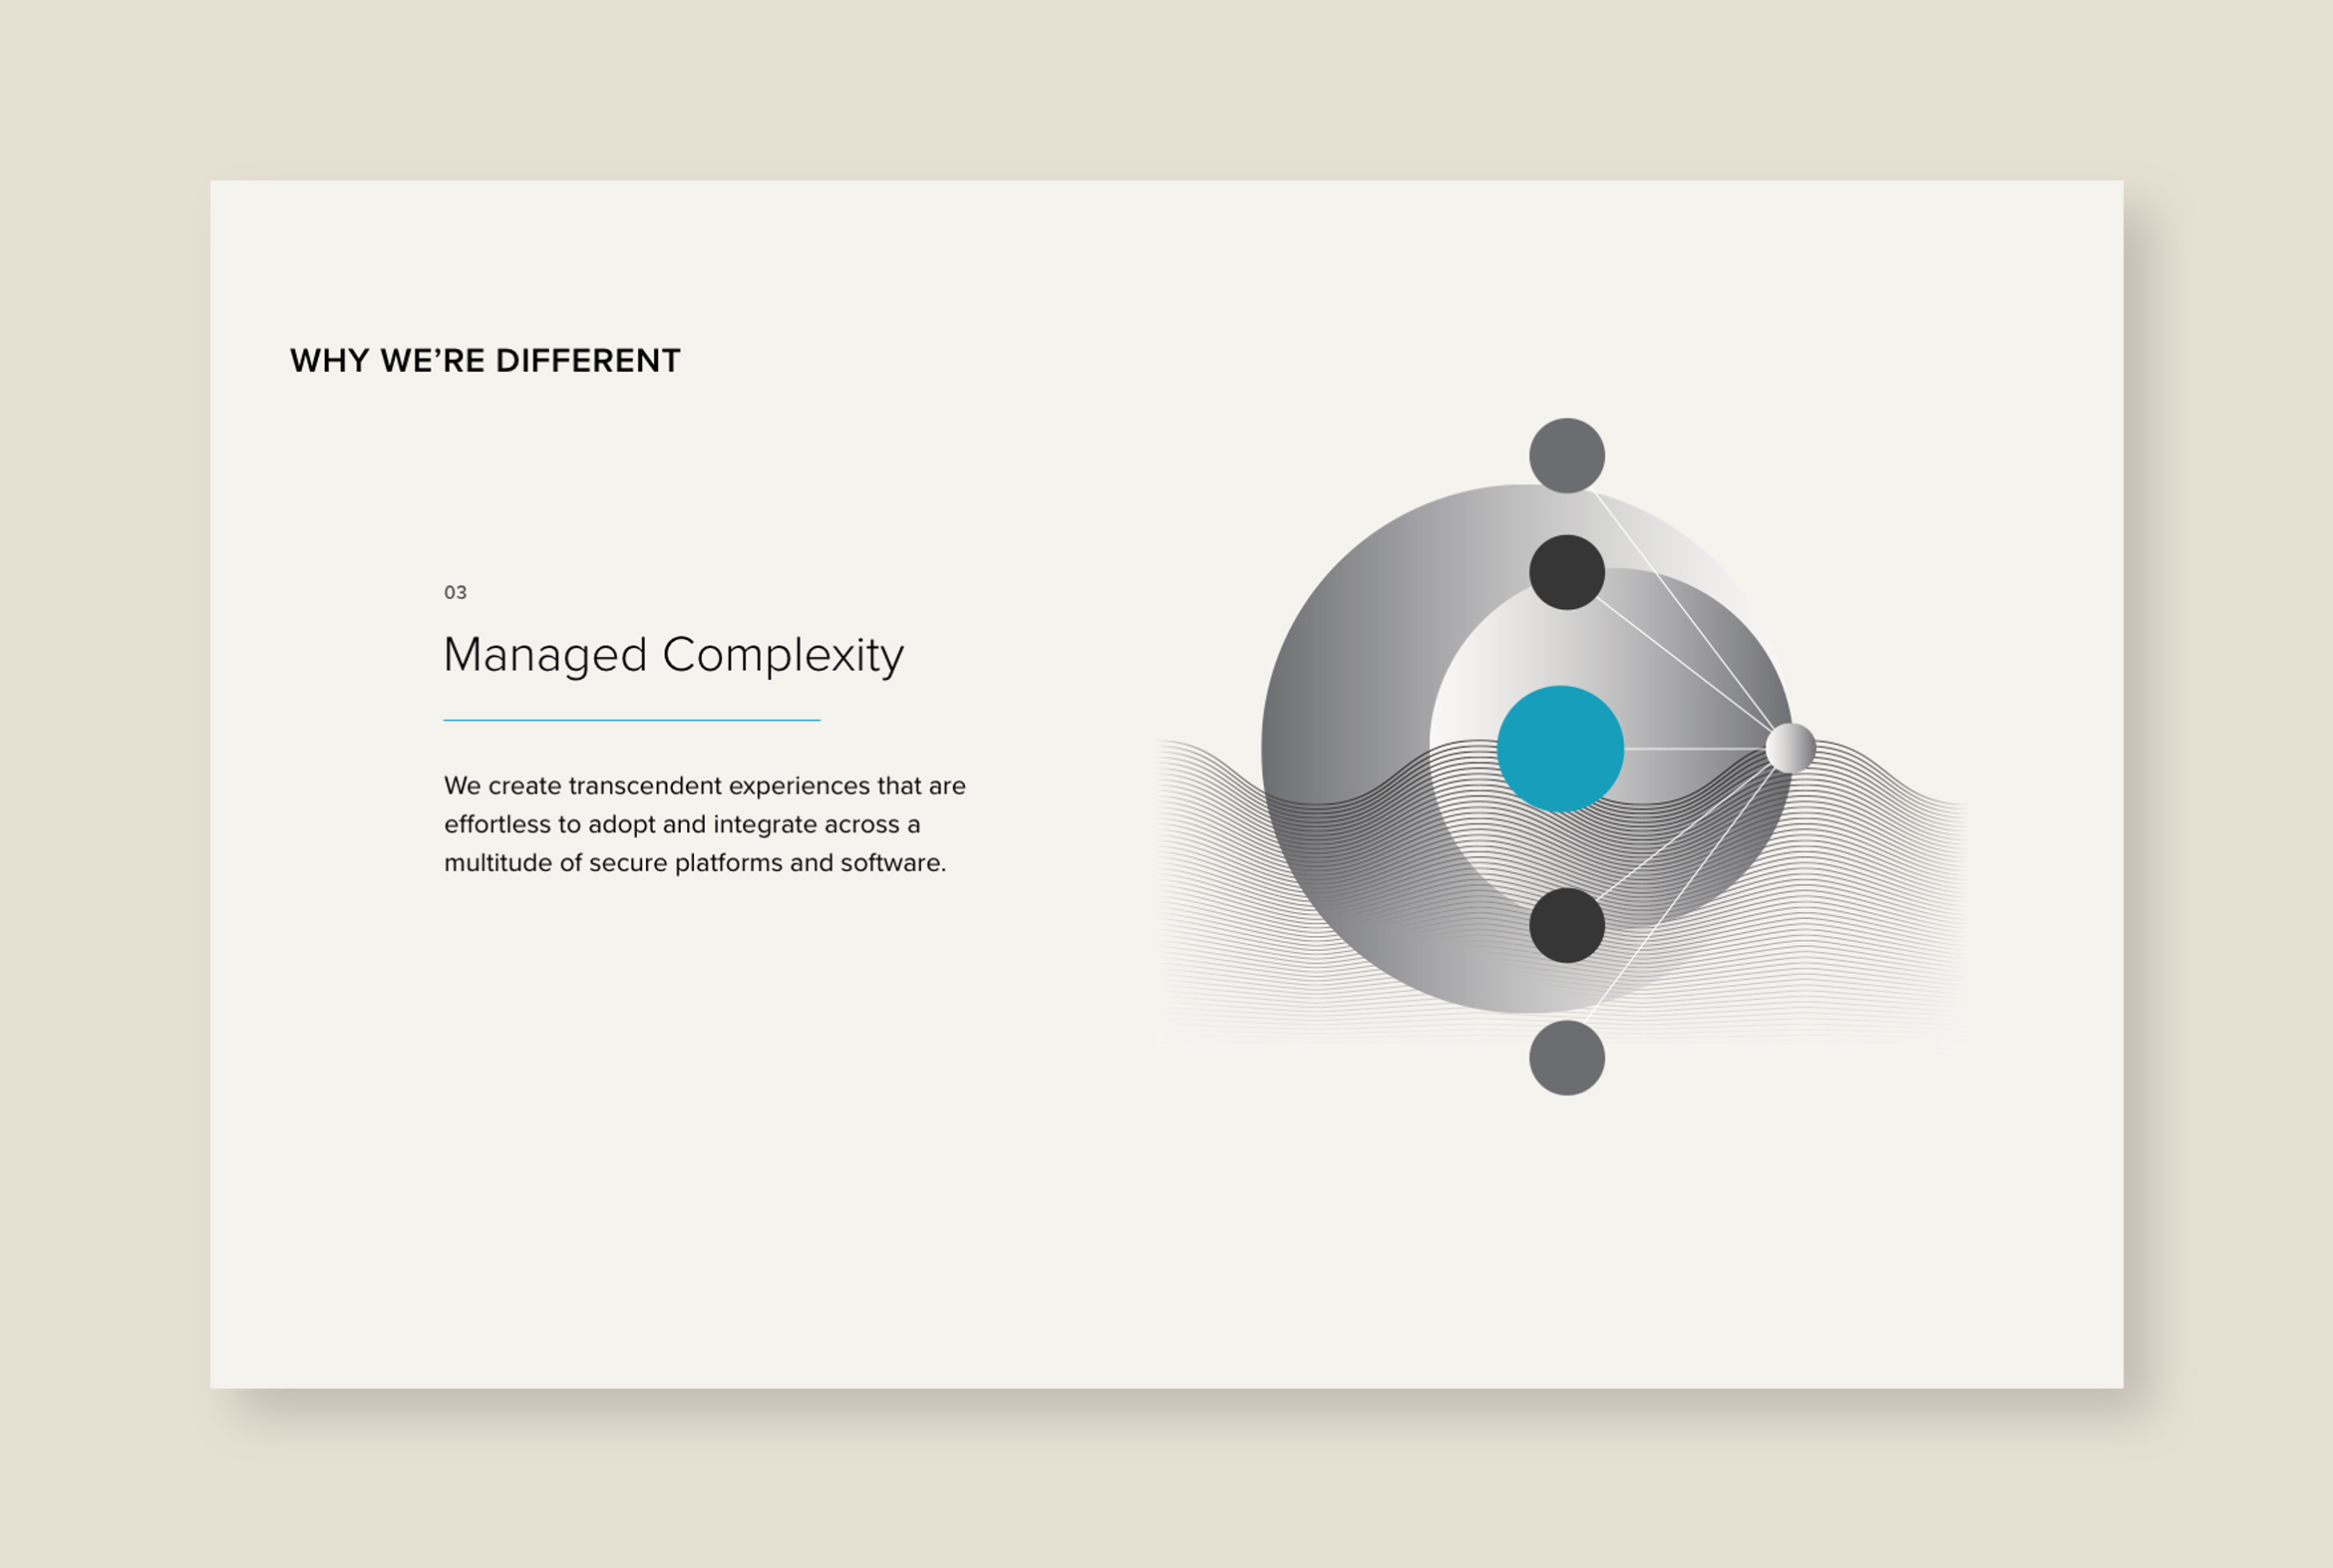 bldg25 website infographic of why we're different about managed complexity